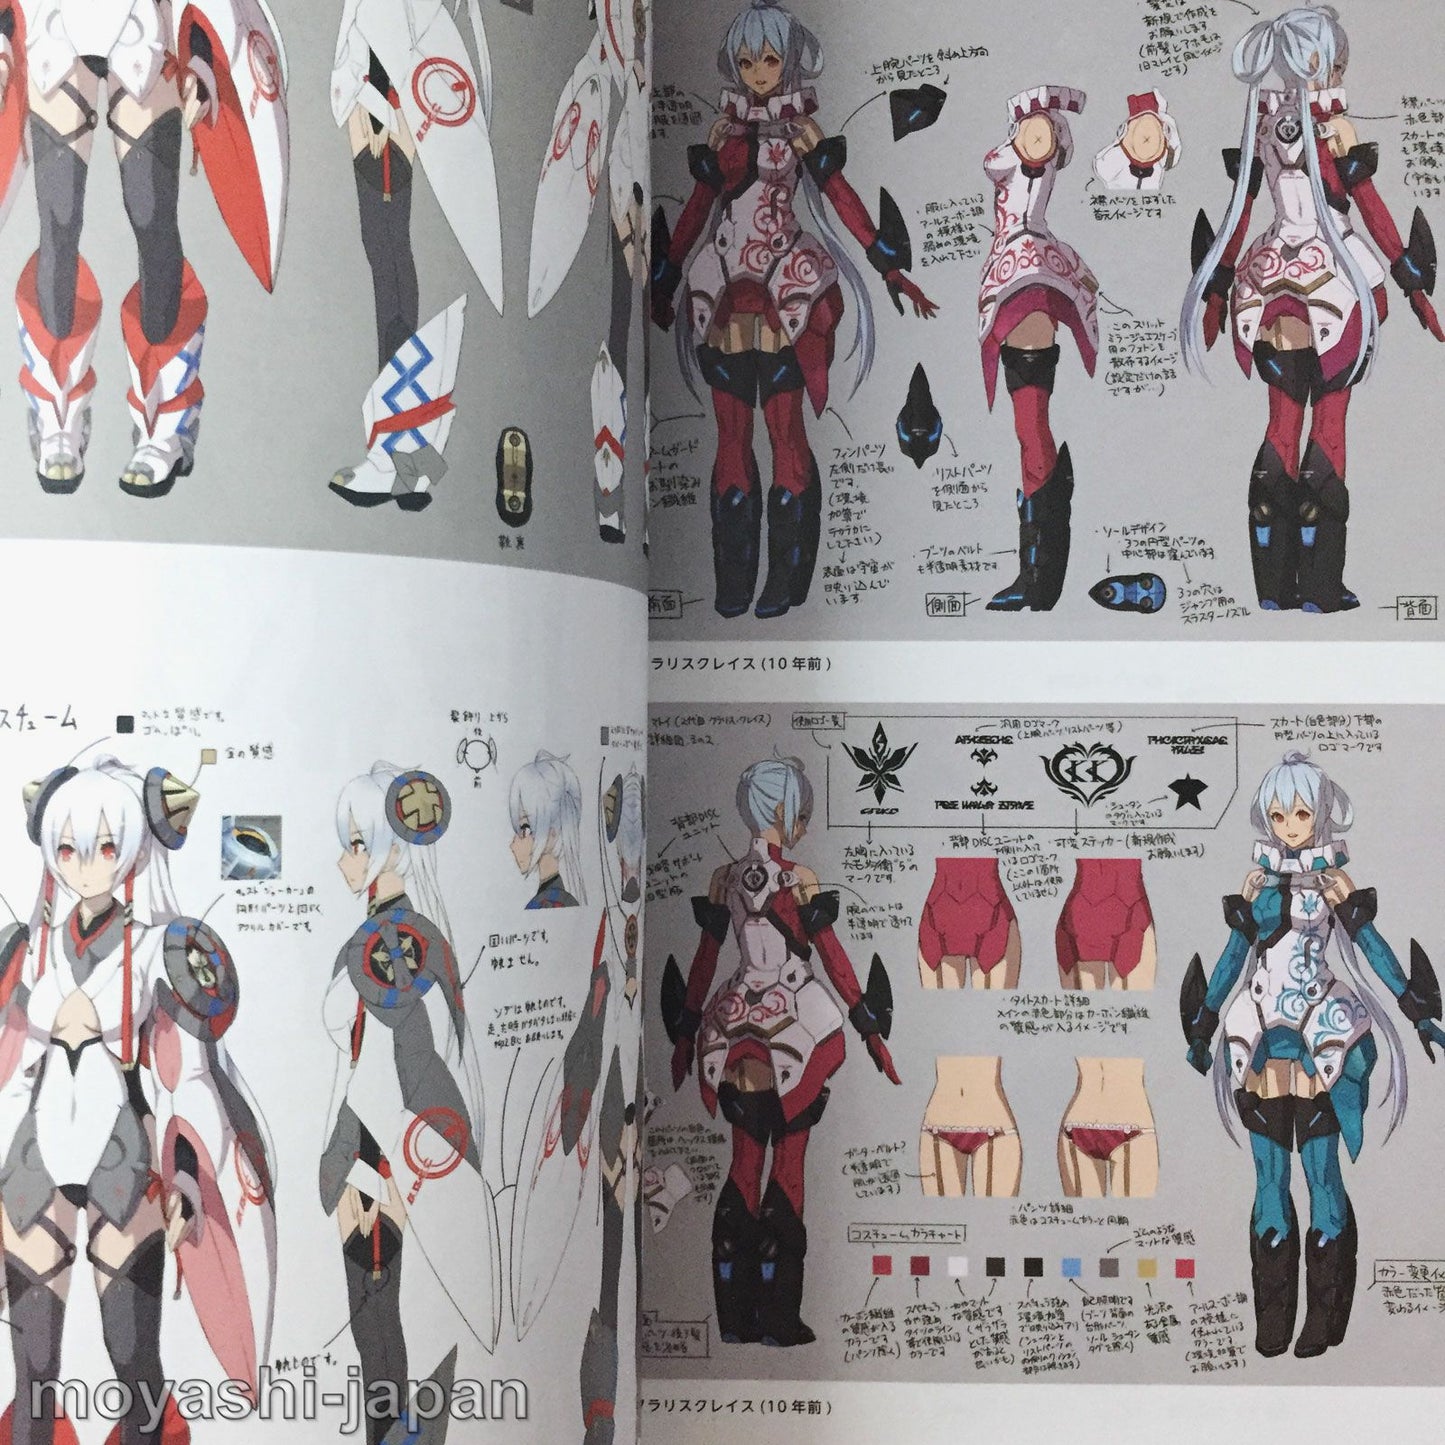 Phantasy Star Online 2 Episode 1&2 Material Collection